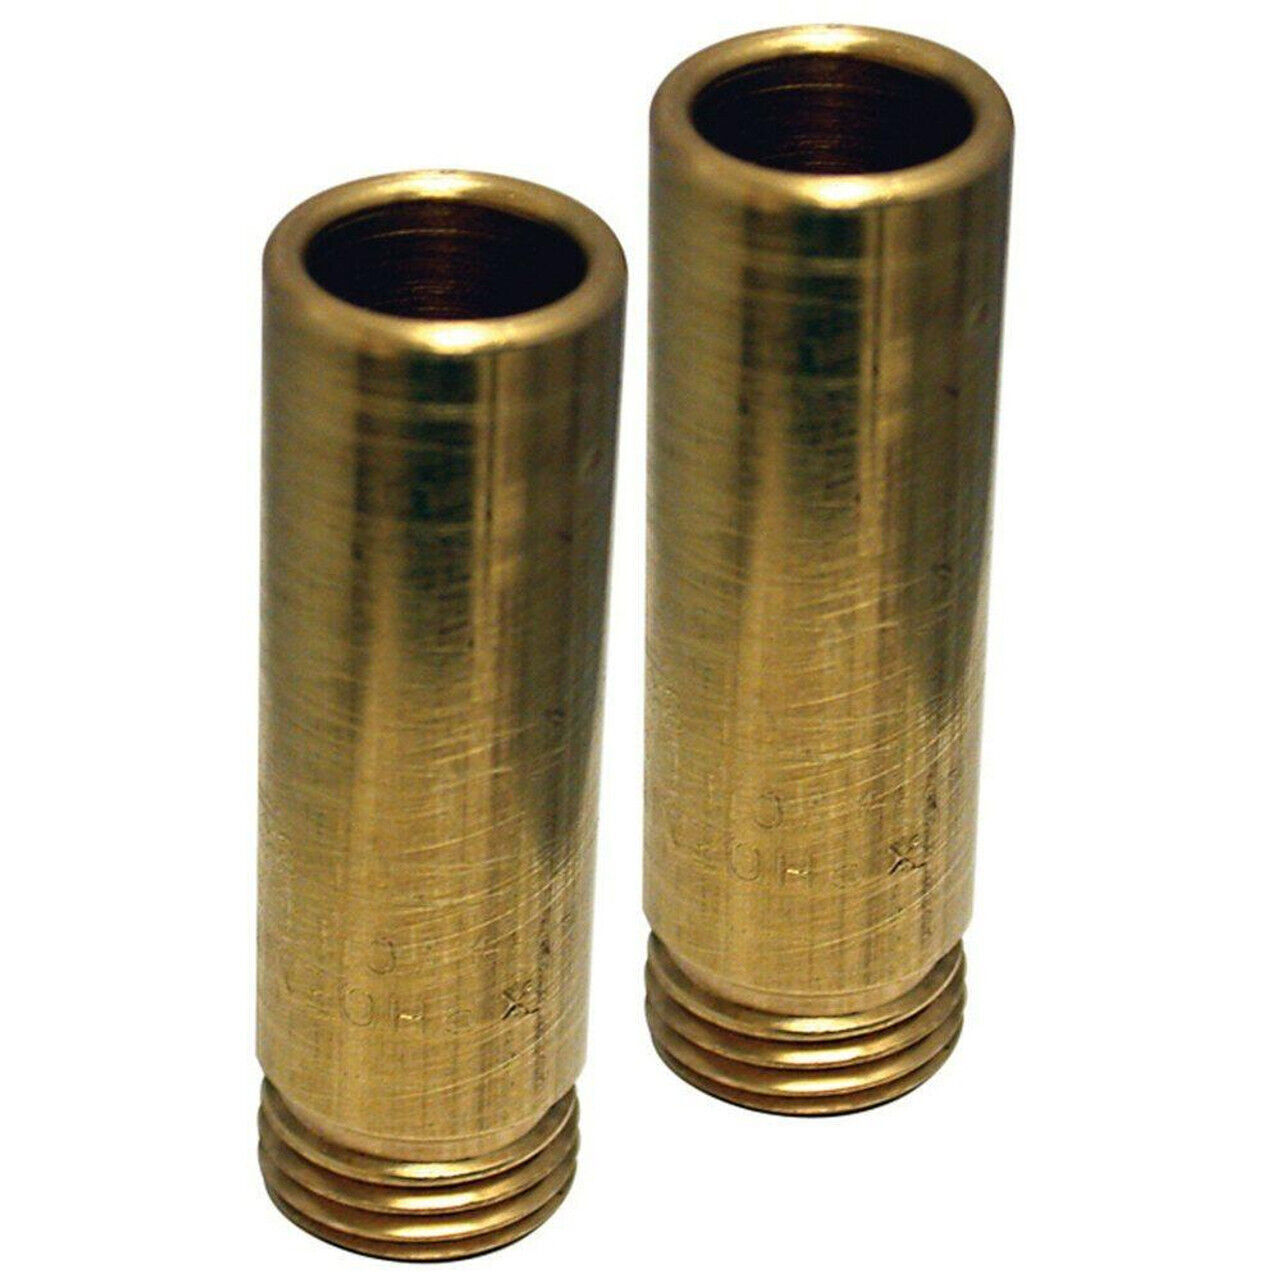 Primary image for Phoenix Brass Faucet Seat 60-1 (2 Pack)